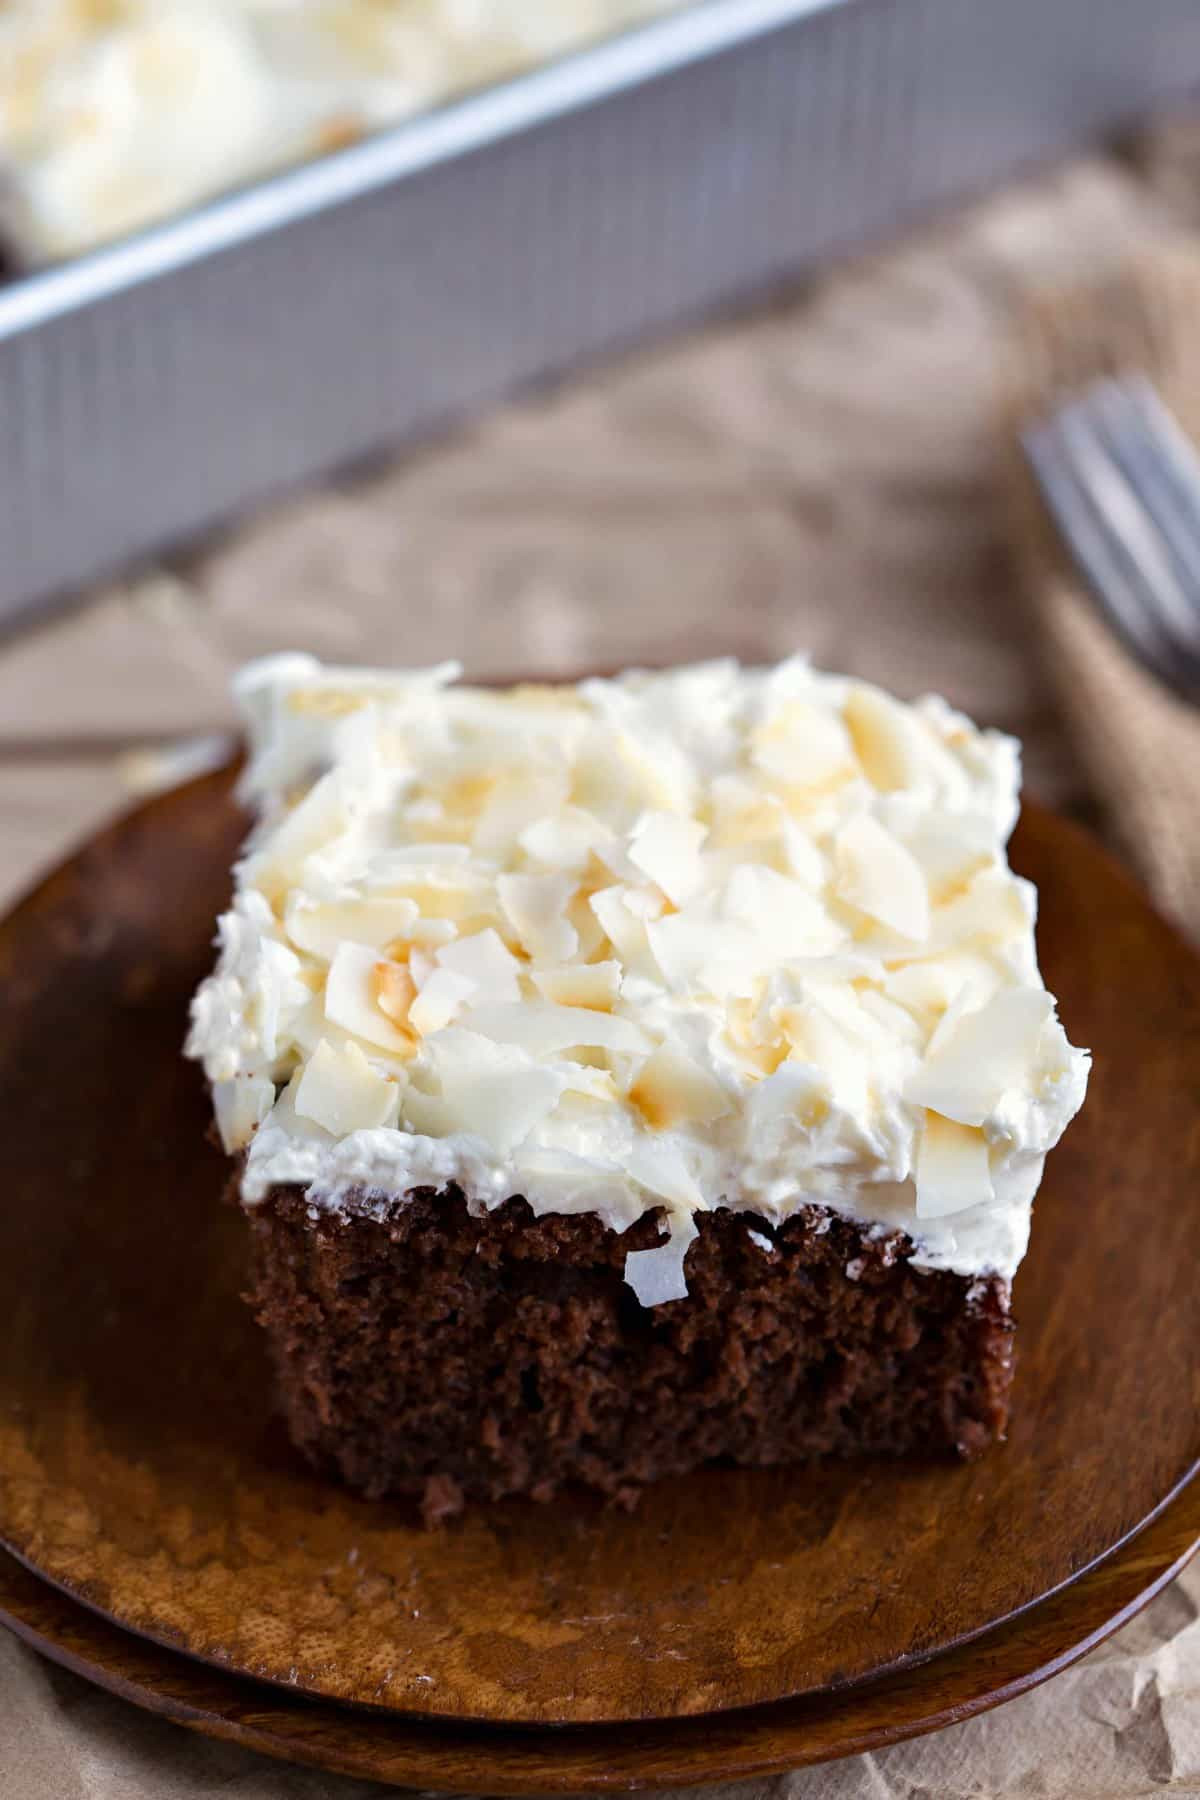 Coconut Cake Recipe With Coconut Milk
 50 Ways to Use Canned Coconut Milk